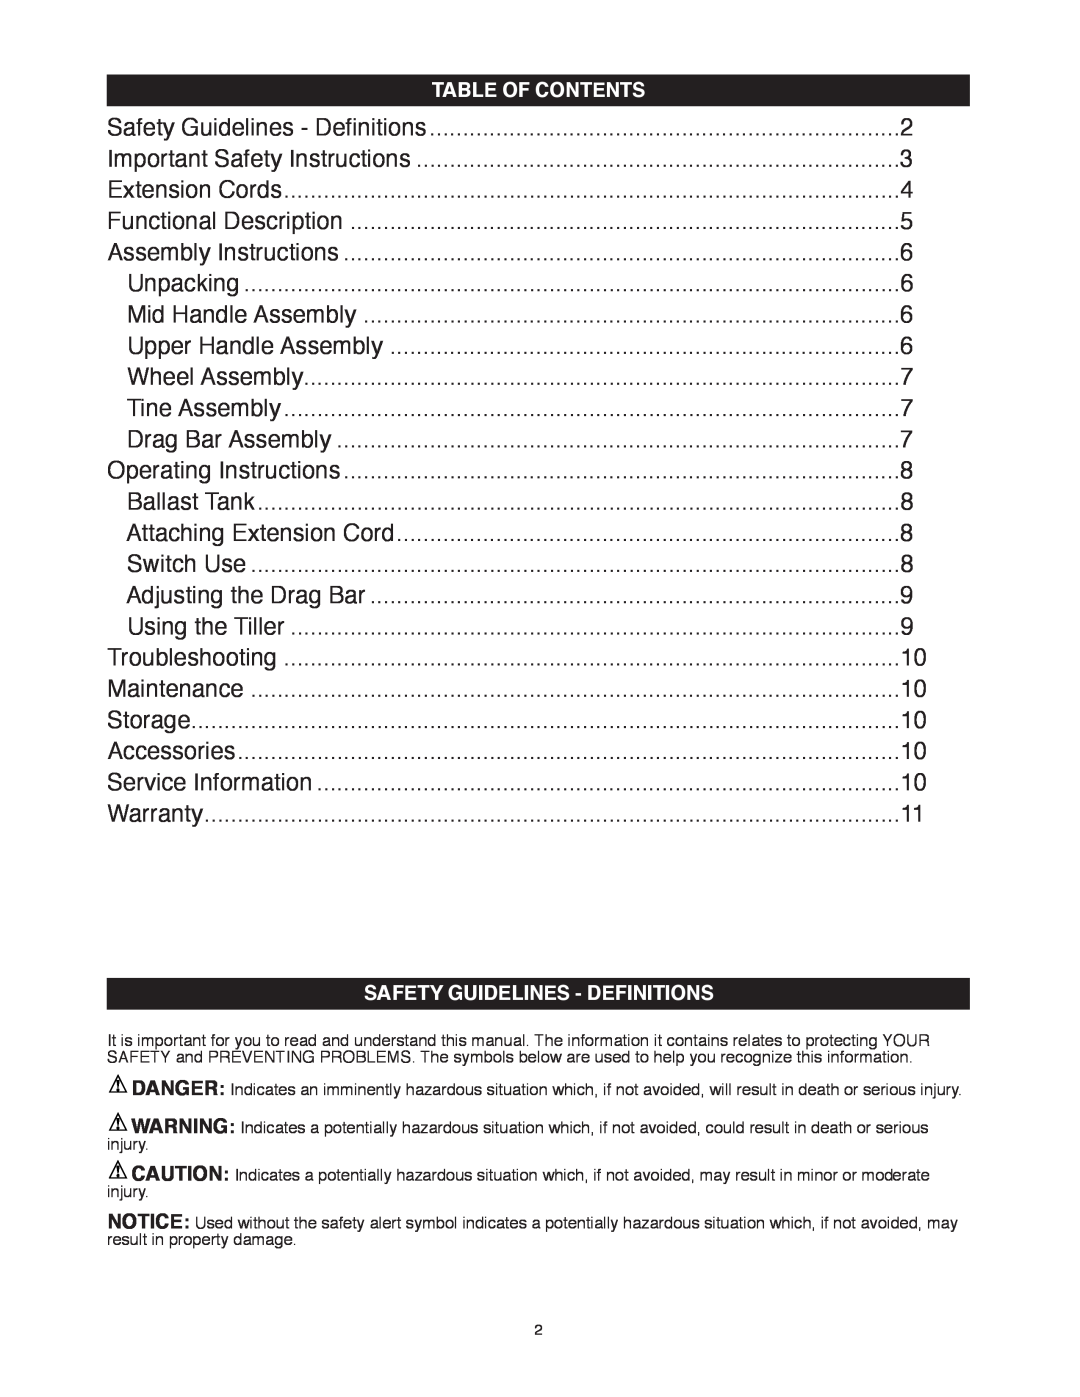 Black & Decker TL10 instruction manual Safety Guidelines - Definitions, Table Of Contents 